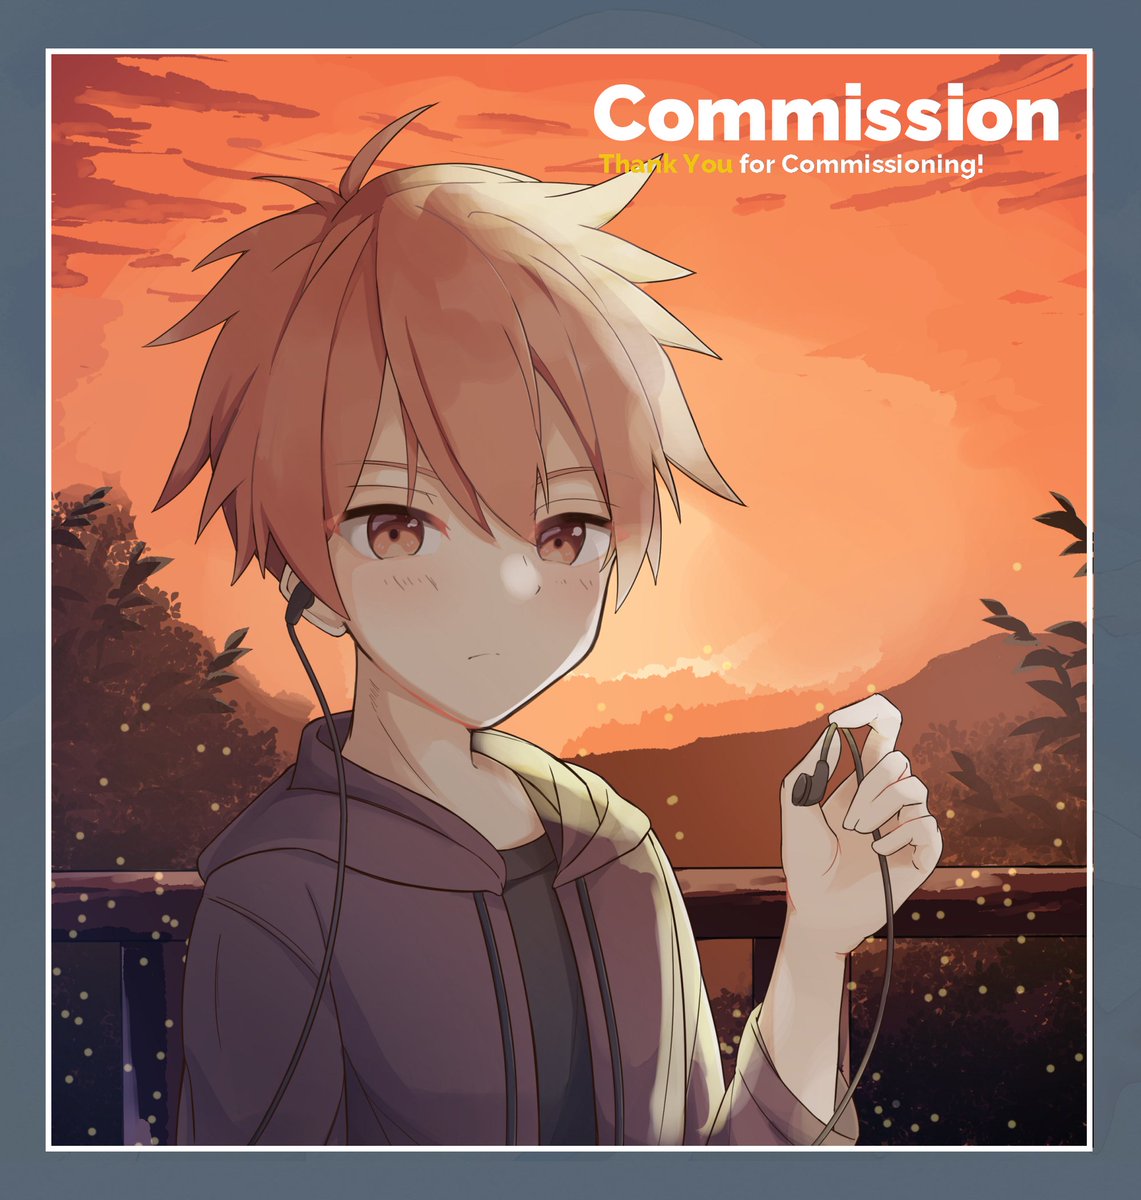 Mezuu Commission Open Commissioned By Paru Chan Ig Thank You For Commissioning Shota Digitalart Commission イラスト ショタ The Commissioner Has An Amazing Web Comic Check It Out Here T Co Vbcj1uuia7 T Co